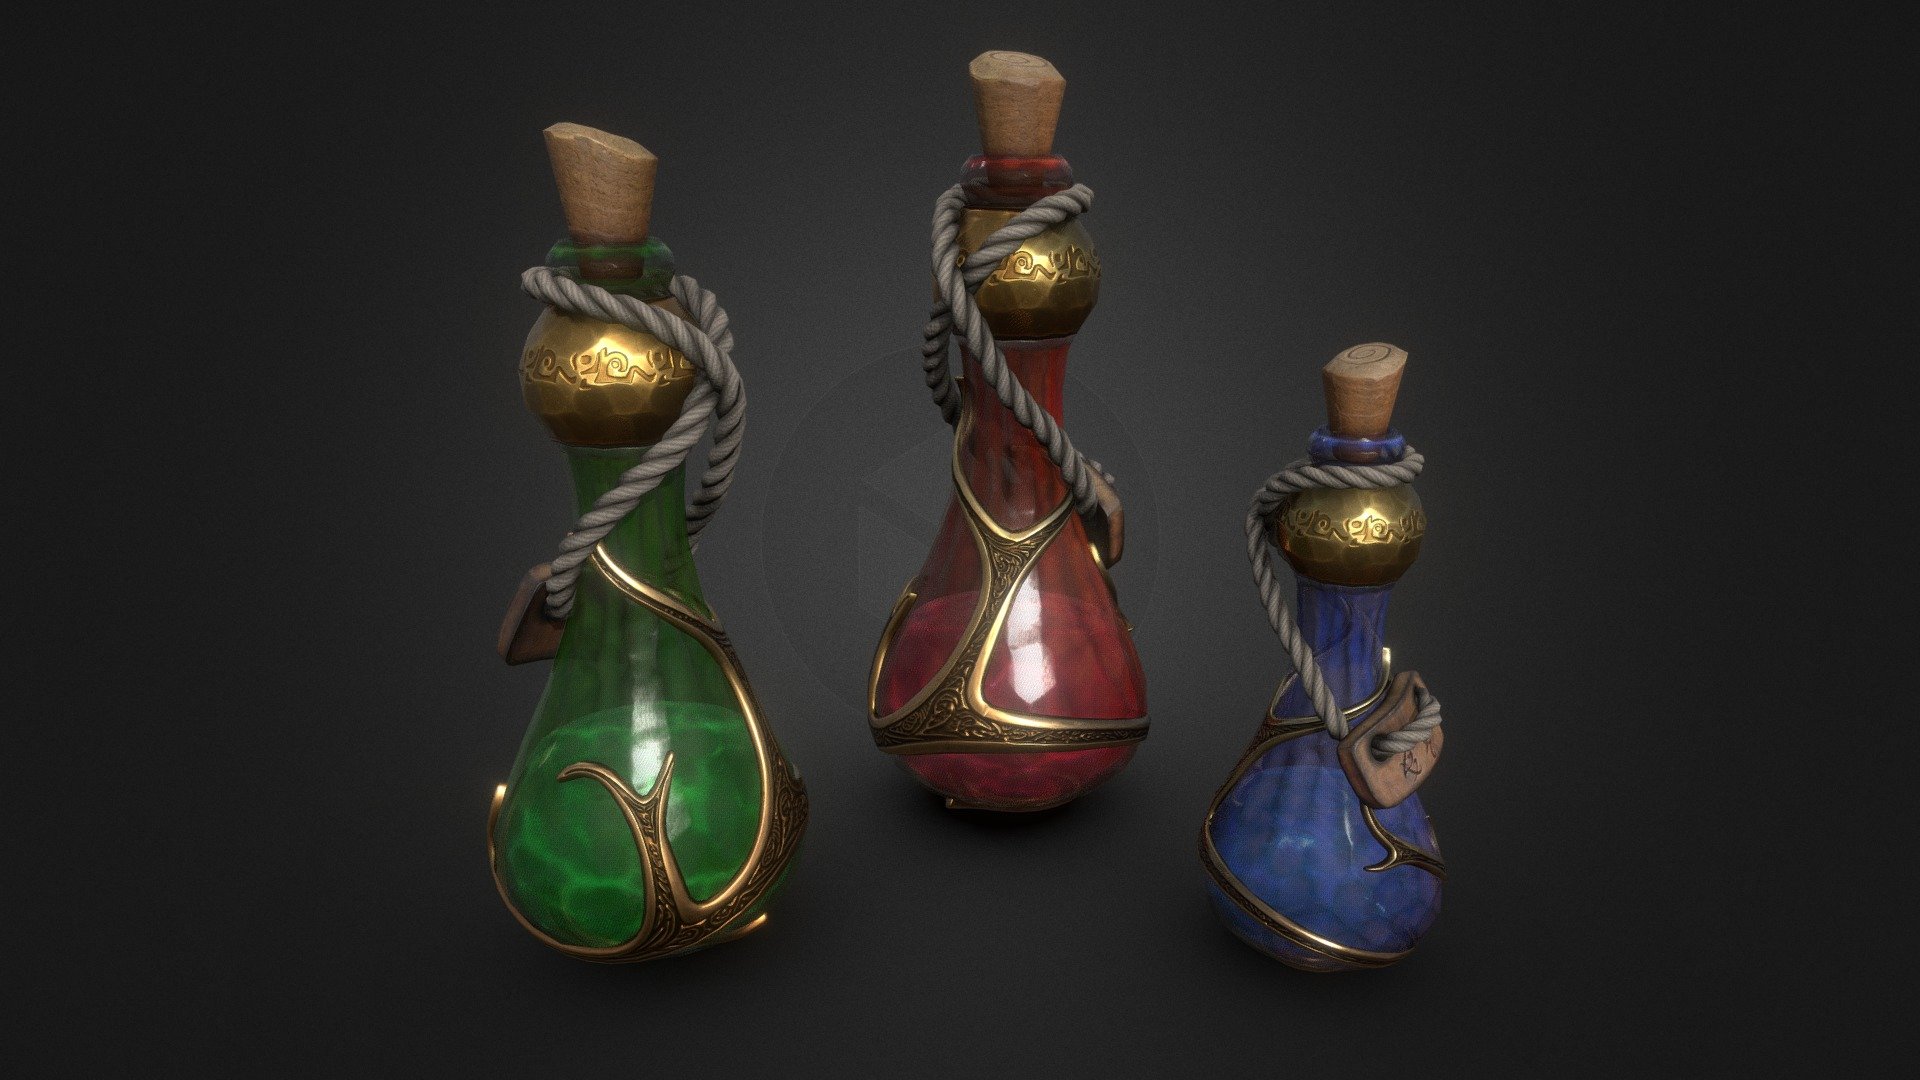 Potions low poly model

2k textures. Polycount: 4316 tris. each bottle.

Model created on Blender and ZBrush. Textured with Substance Painter 3d model